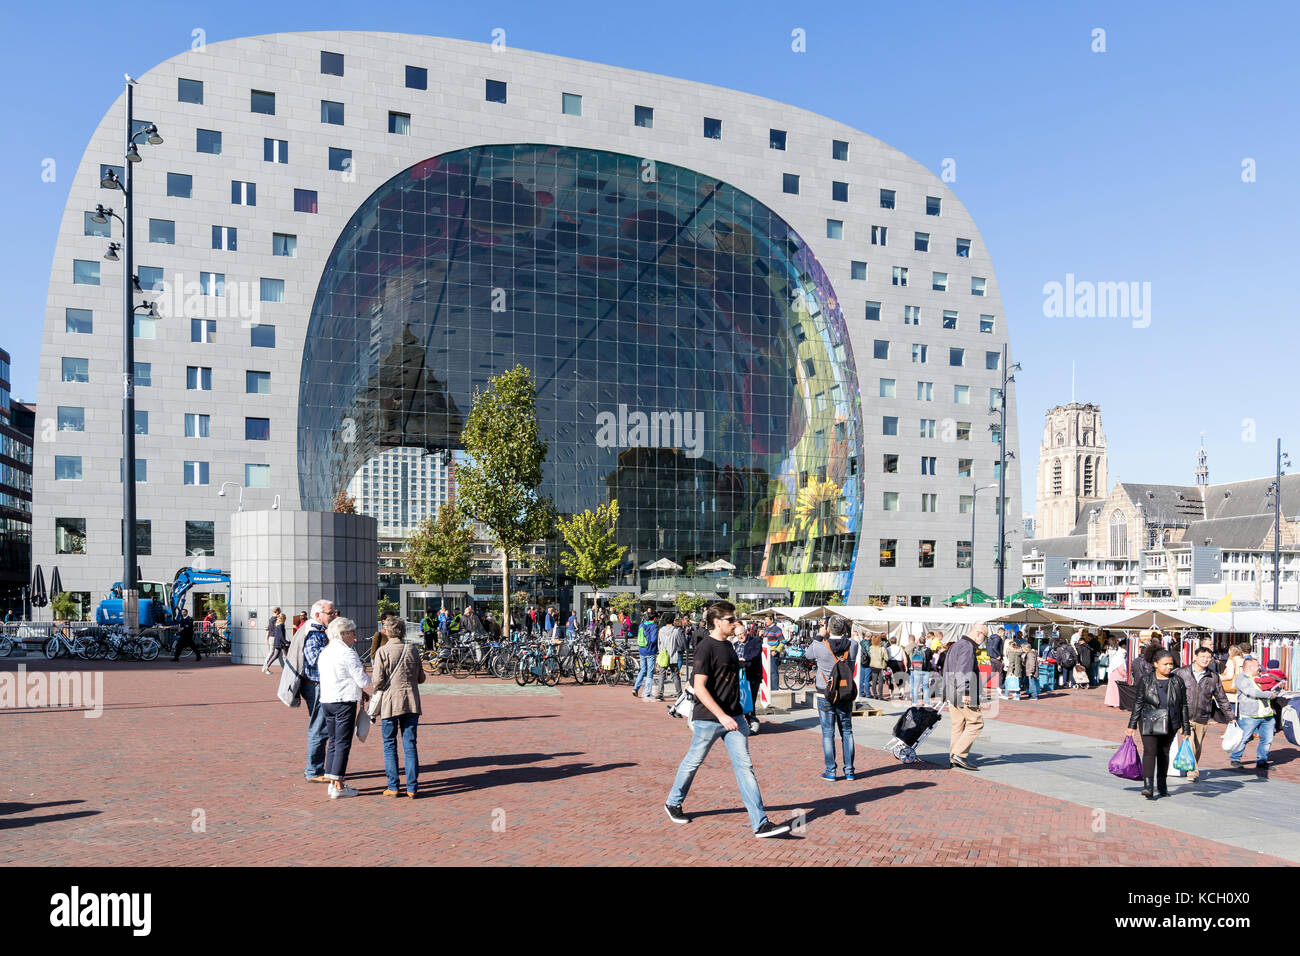 The Markthal (Market Hall), a residential and office building with a market hall underneath, located in Rotterdam, Netherlands Stock Photo